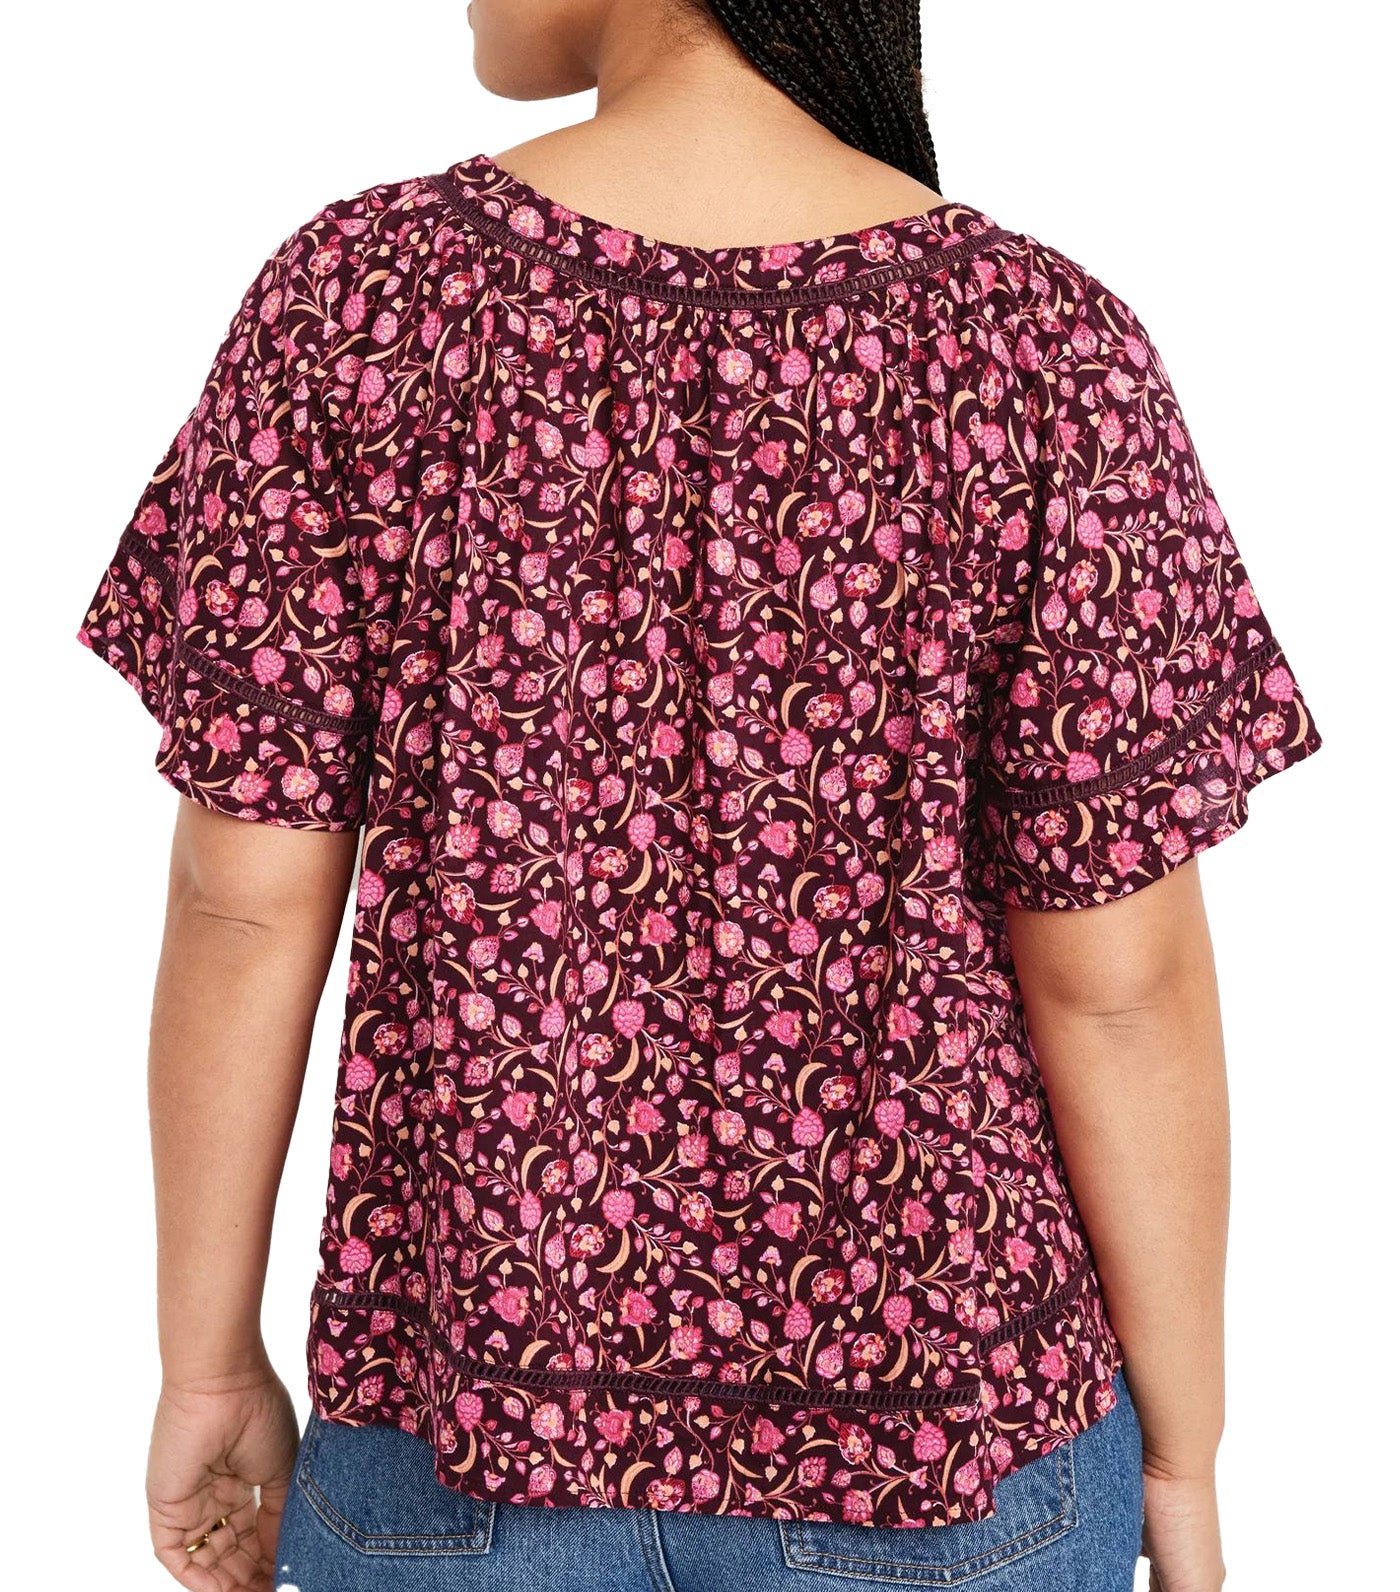 V-Neck Lace-Trim Top for Women Red Floral